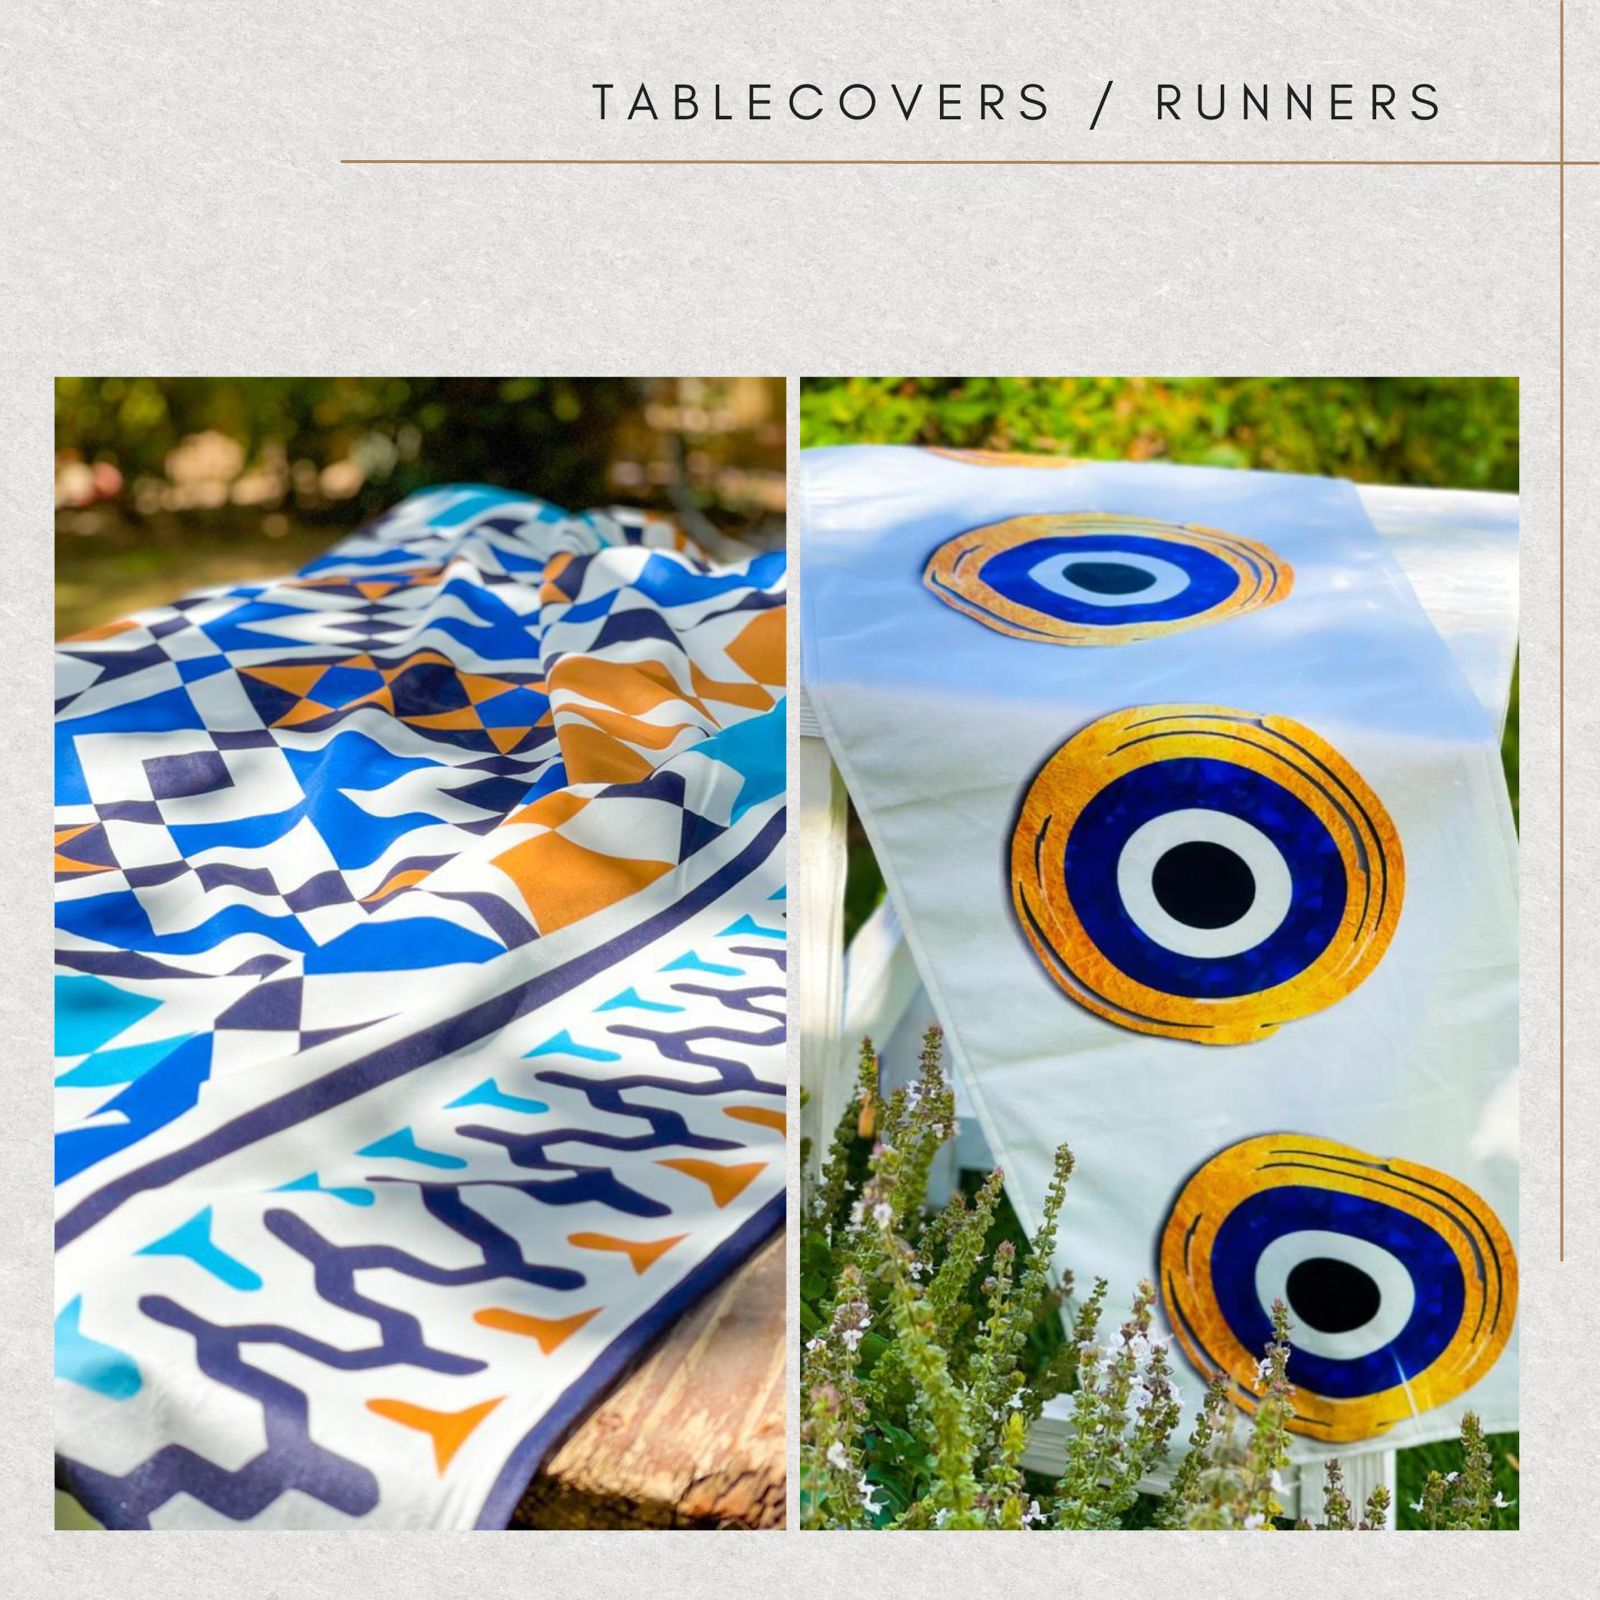 Tablecovers/Runners Img